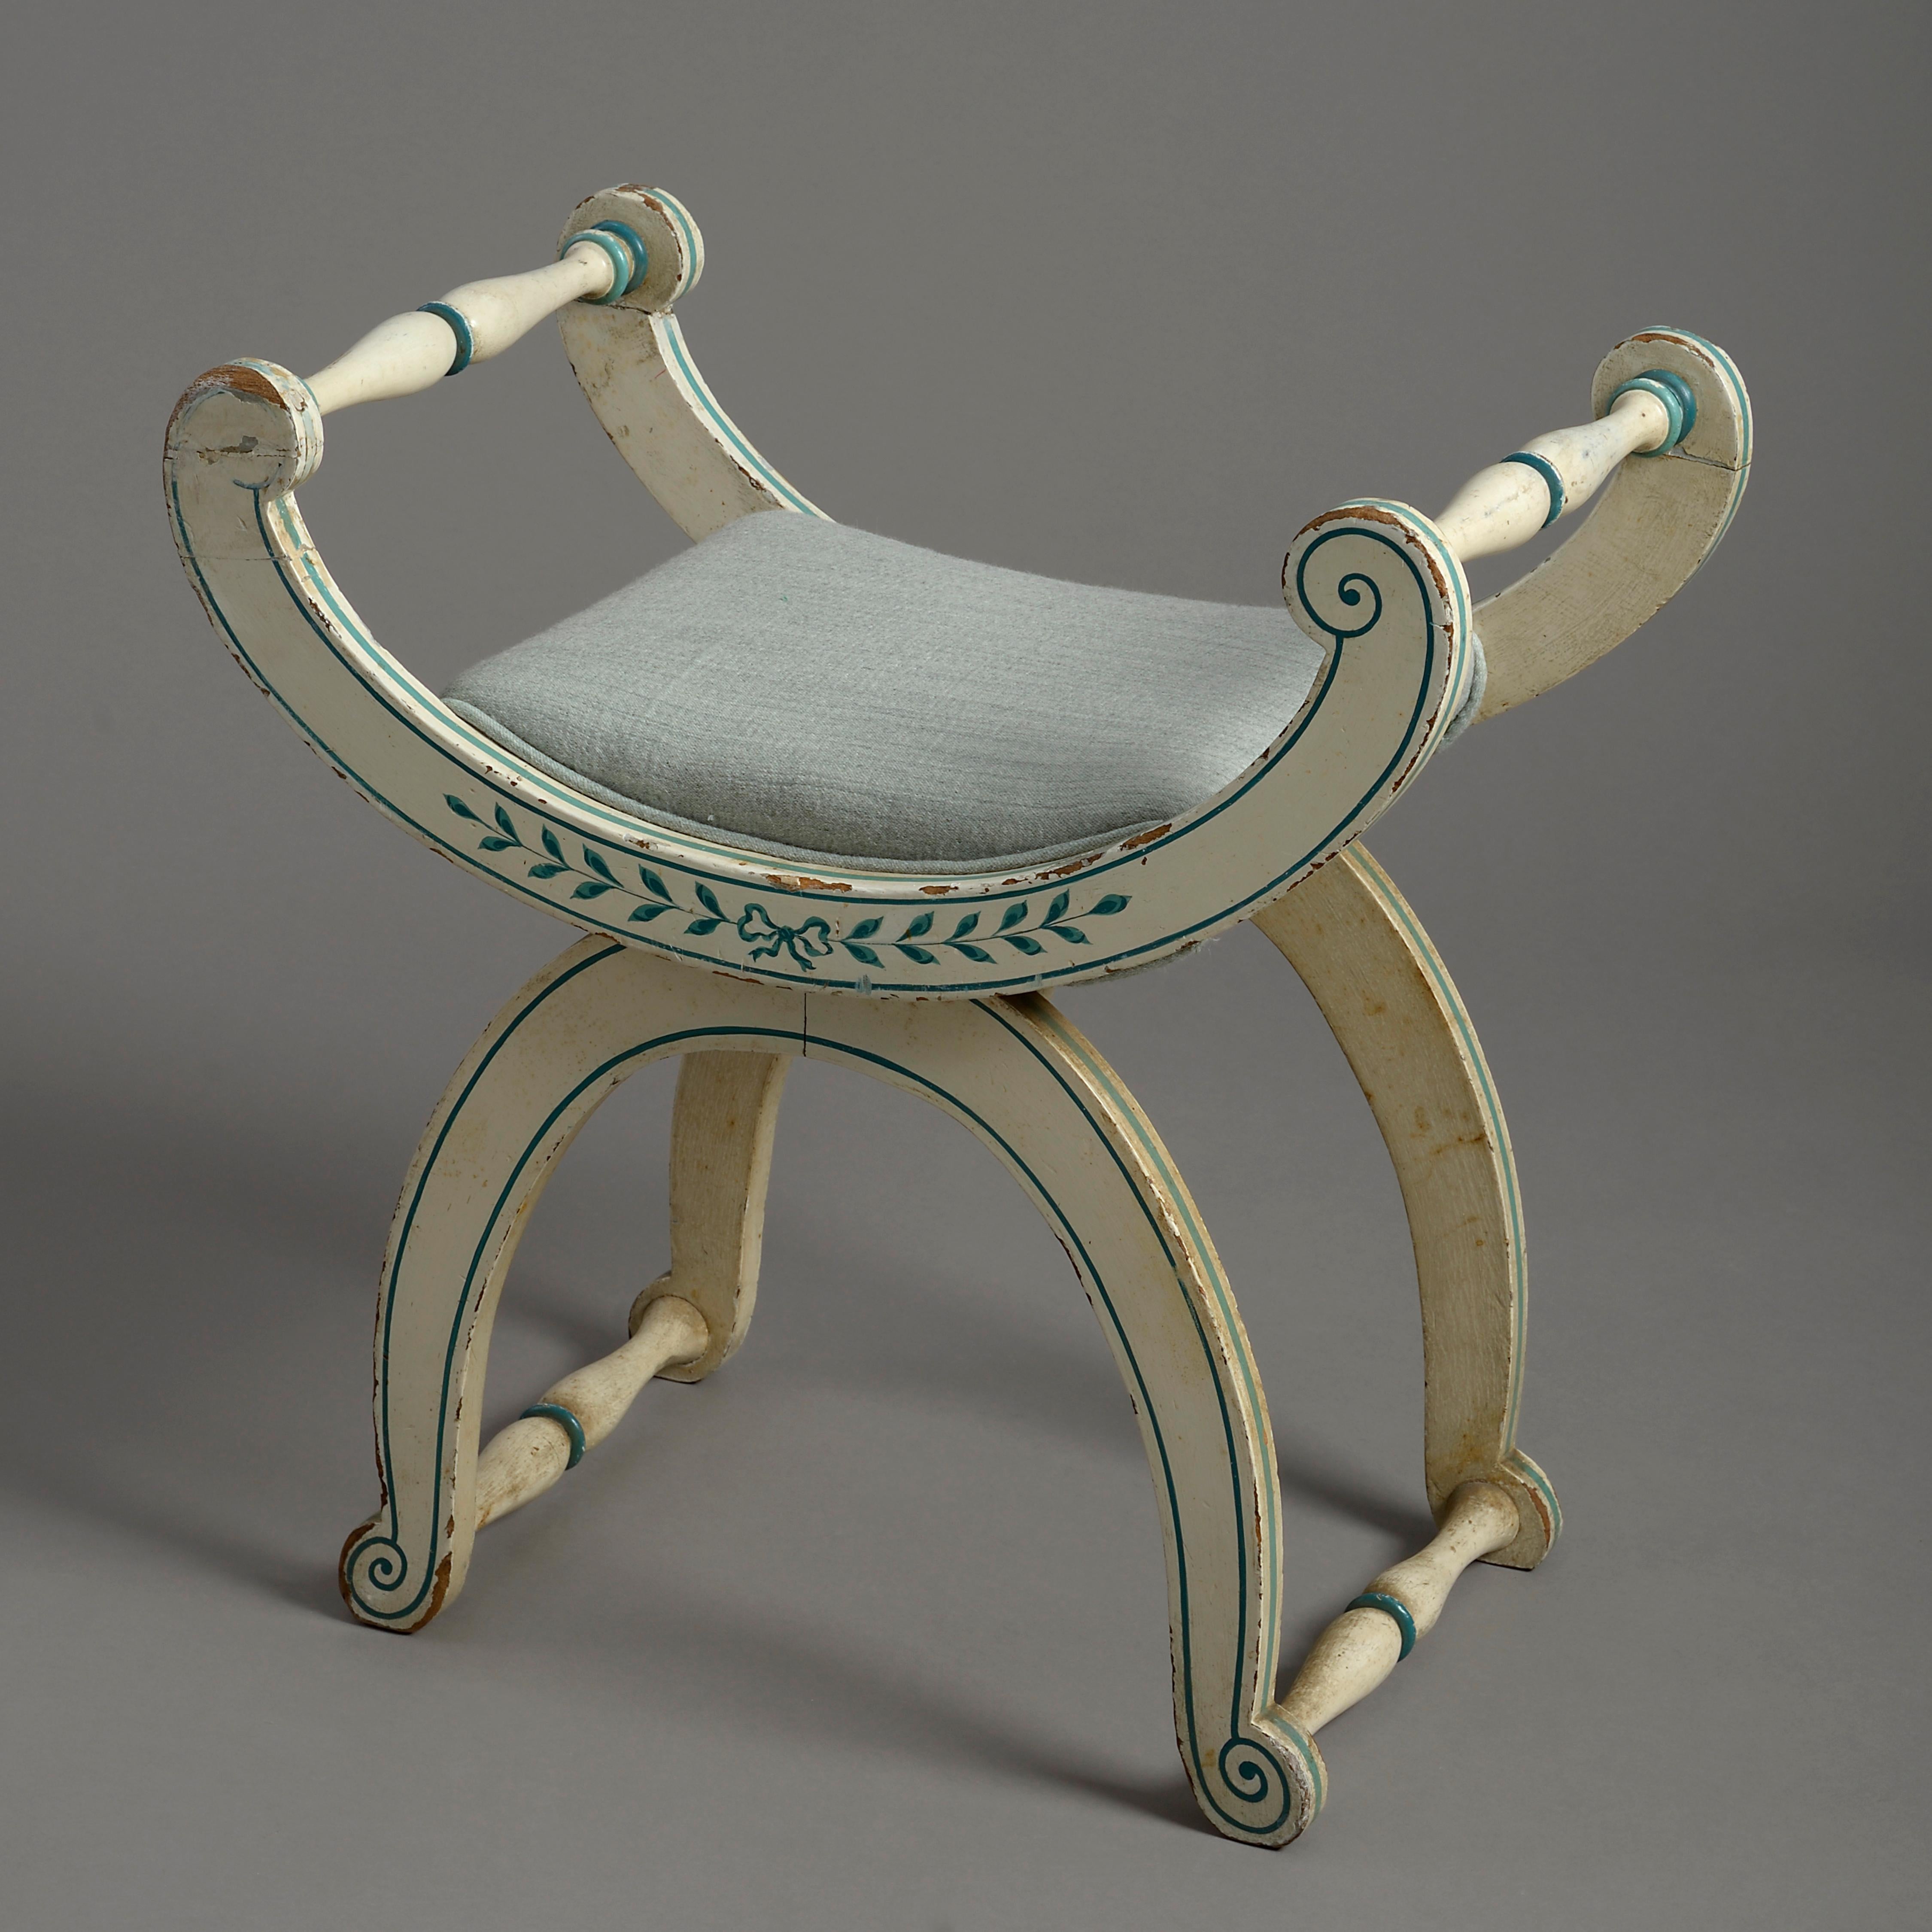 A mid-19th century cream blue painted x-frame stool, the scrolling frame with spindle supports with an upholstered seat.